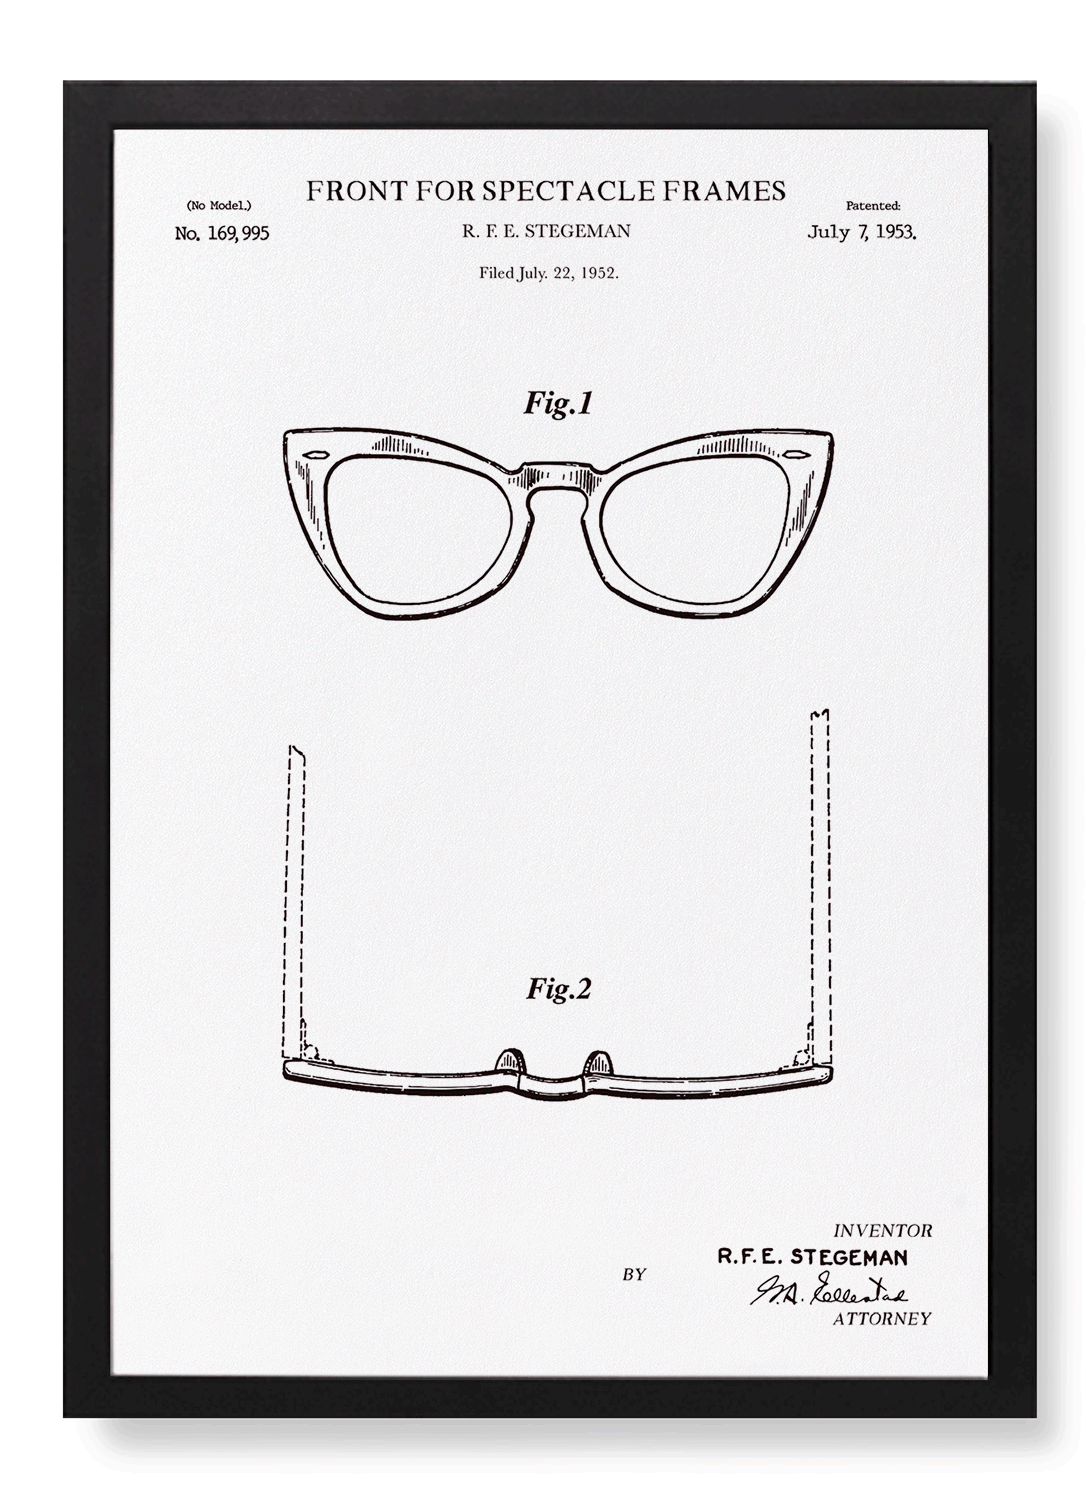 PATENT OF SPECTACLE FRAMES (1953)